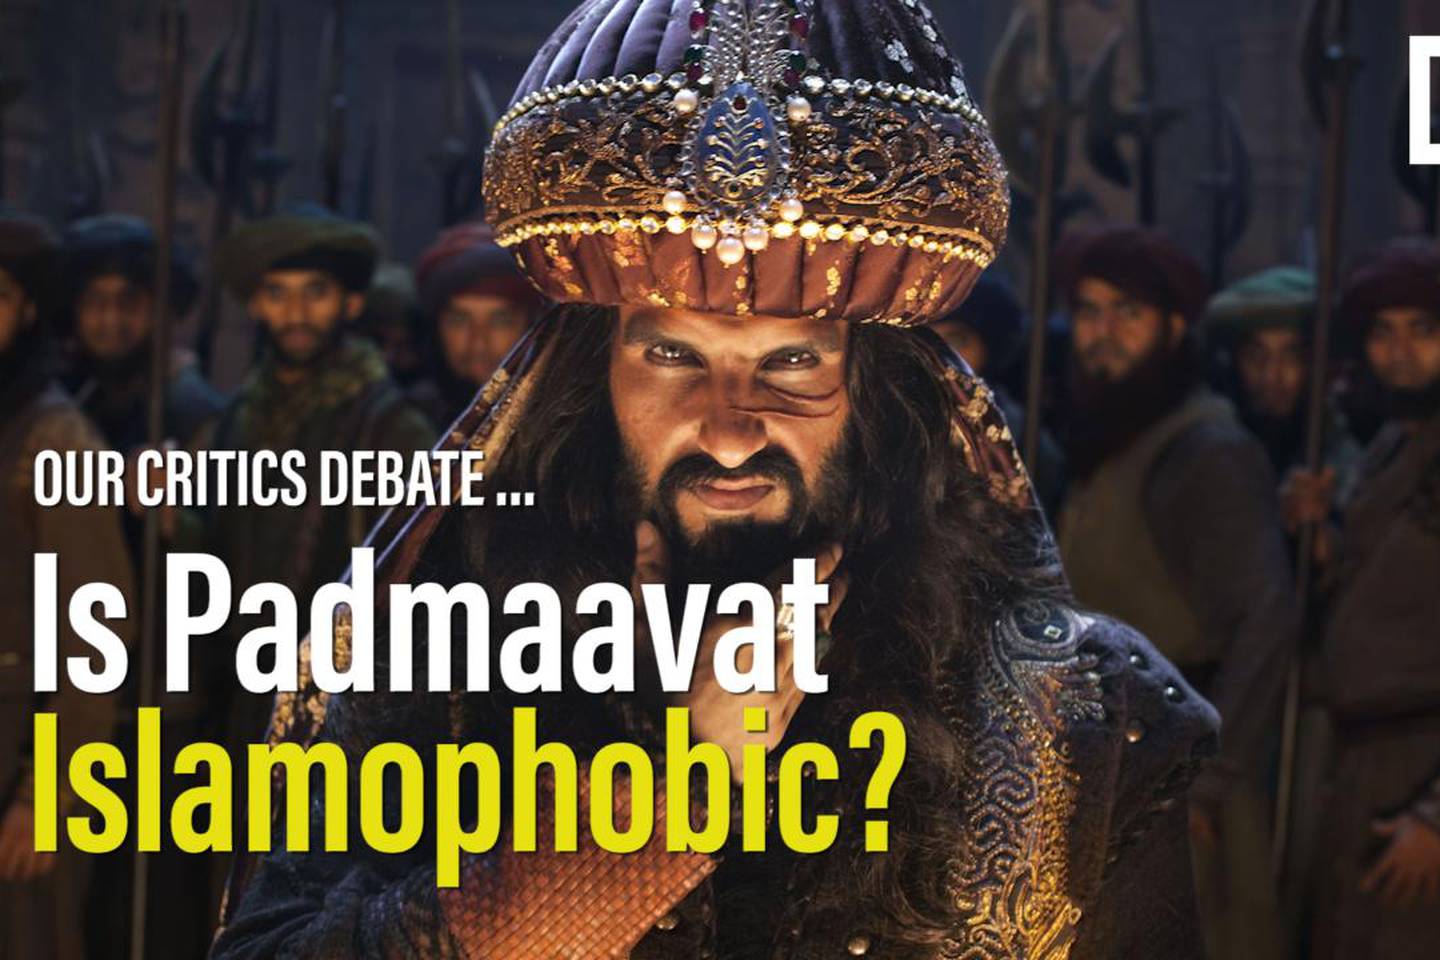 Padmaavat: Discussing the controversy around the film